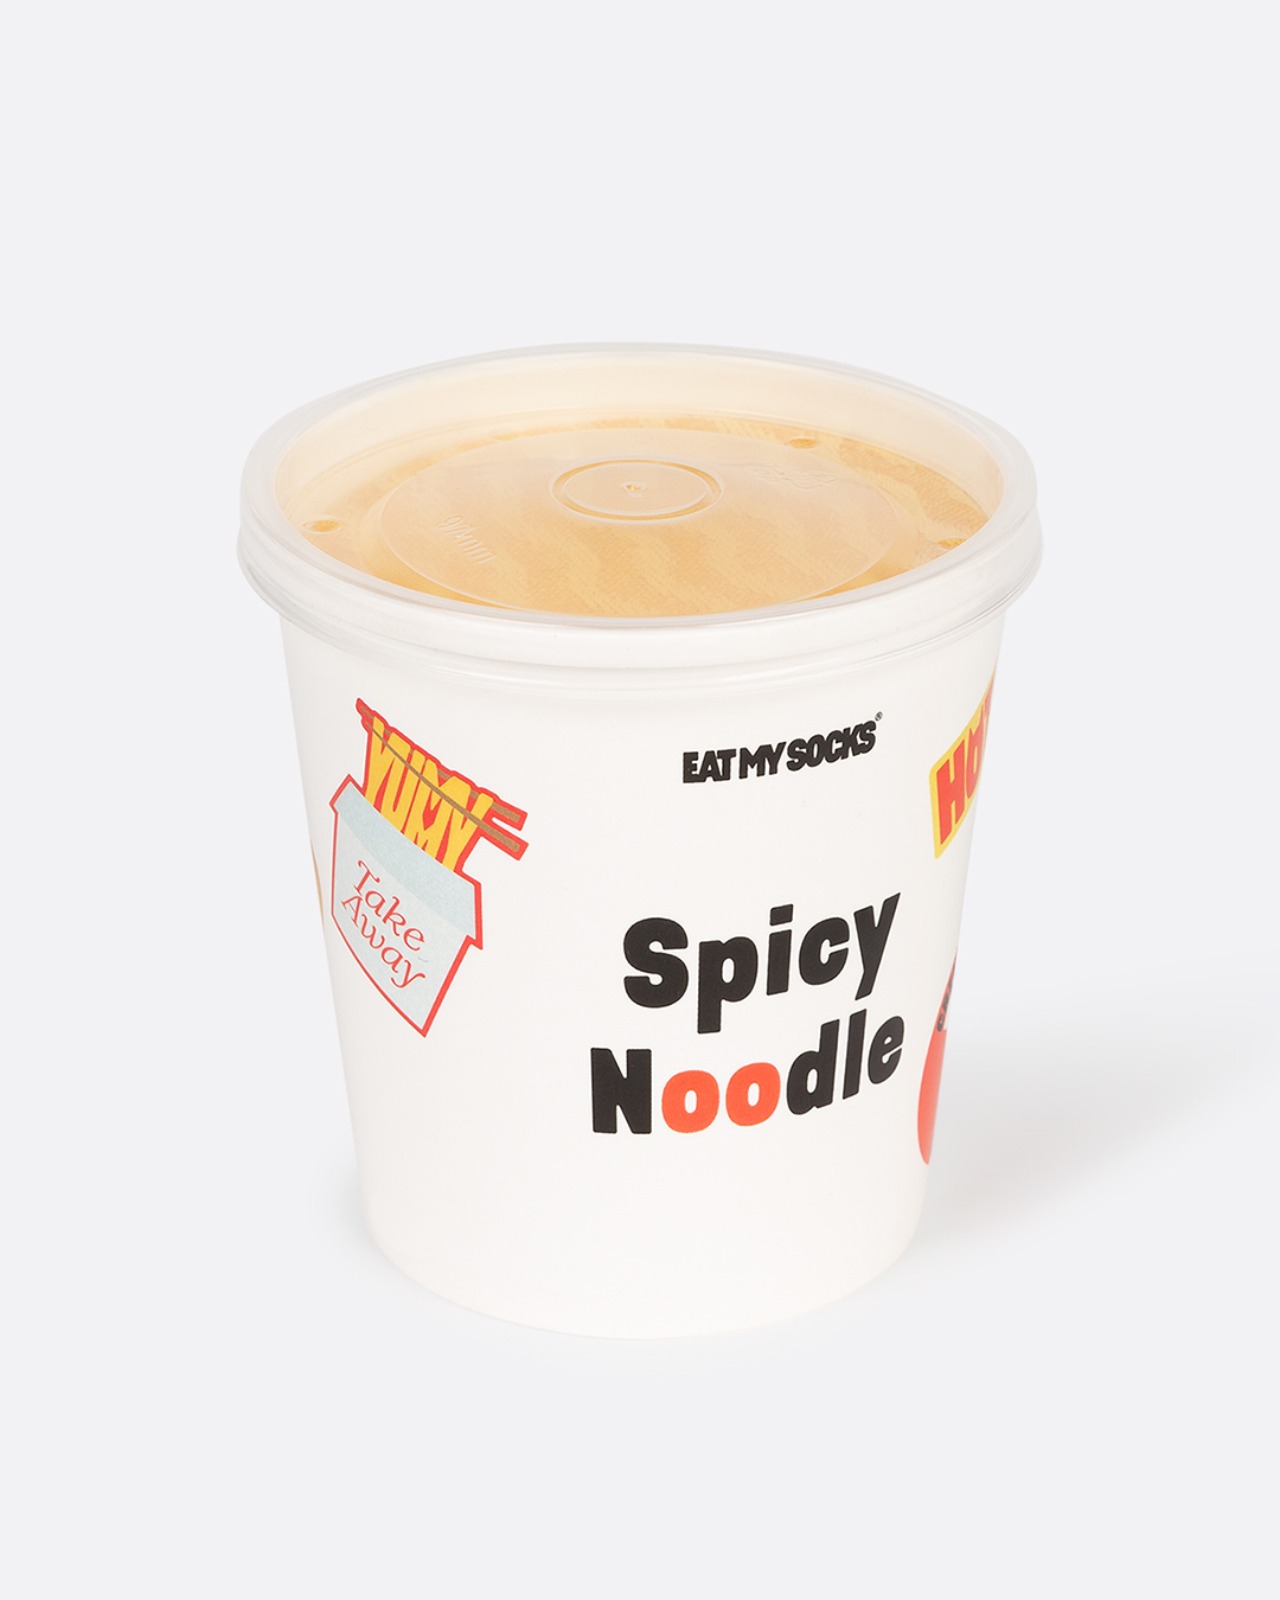 [EAT MY SOCKS] Spicy Noodles (2 pairs)